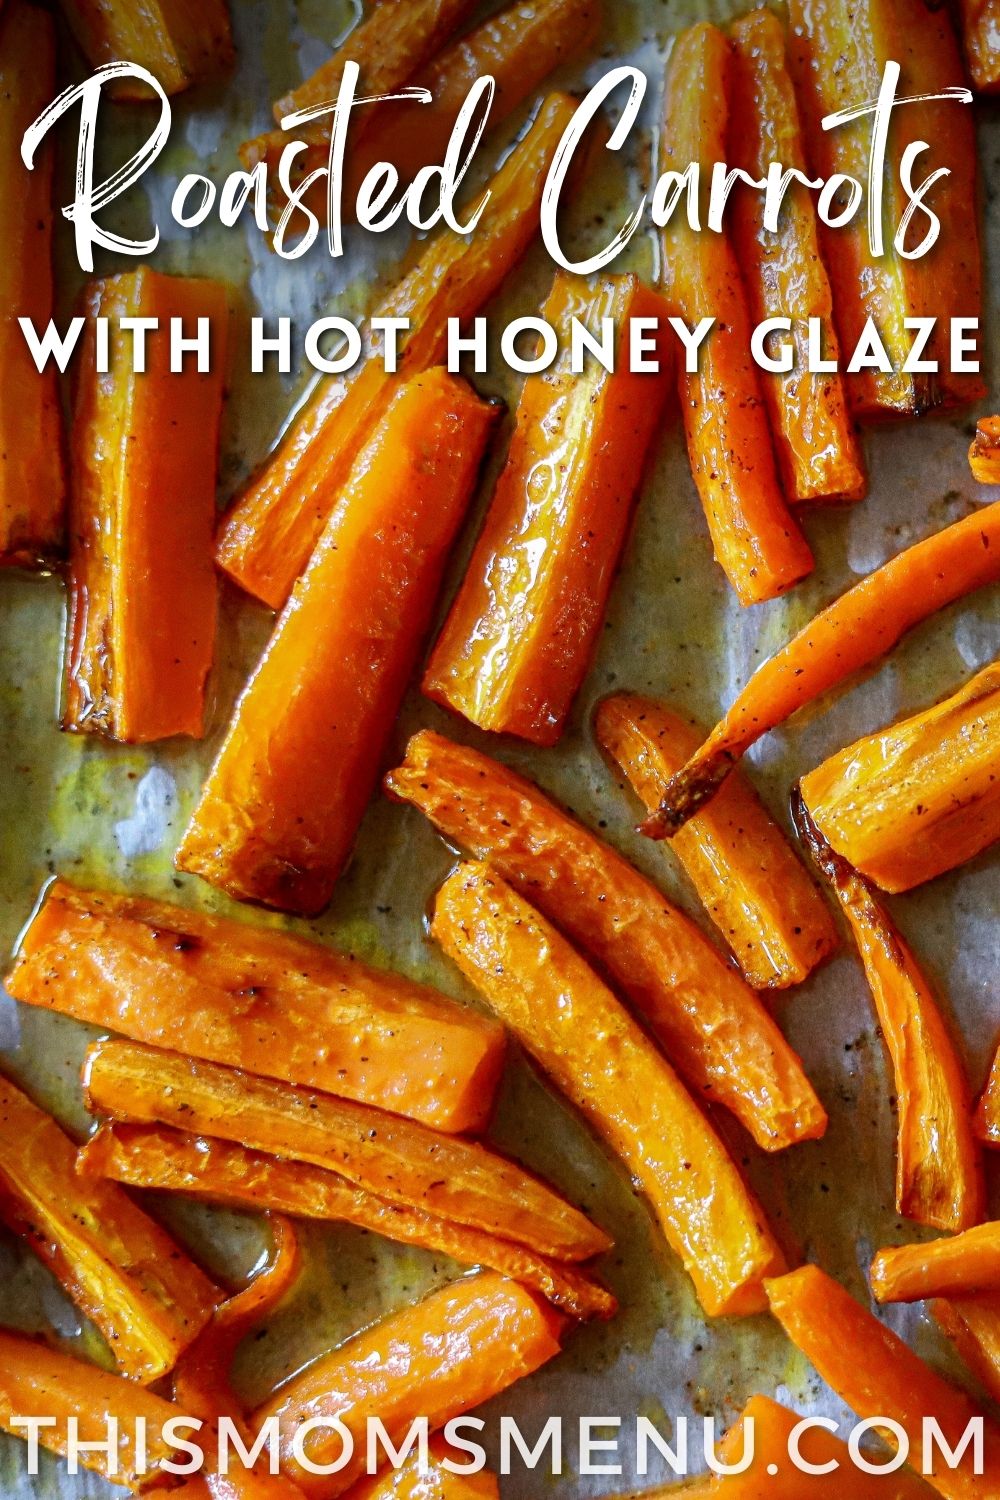 carrots, roasted with a honey glaze and a text overlay